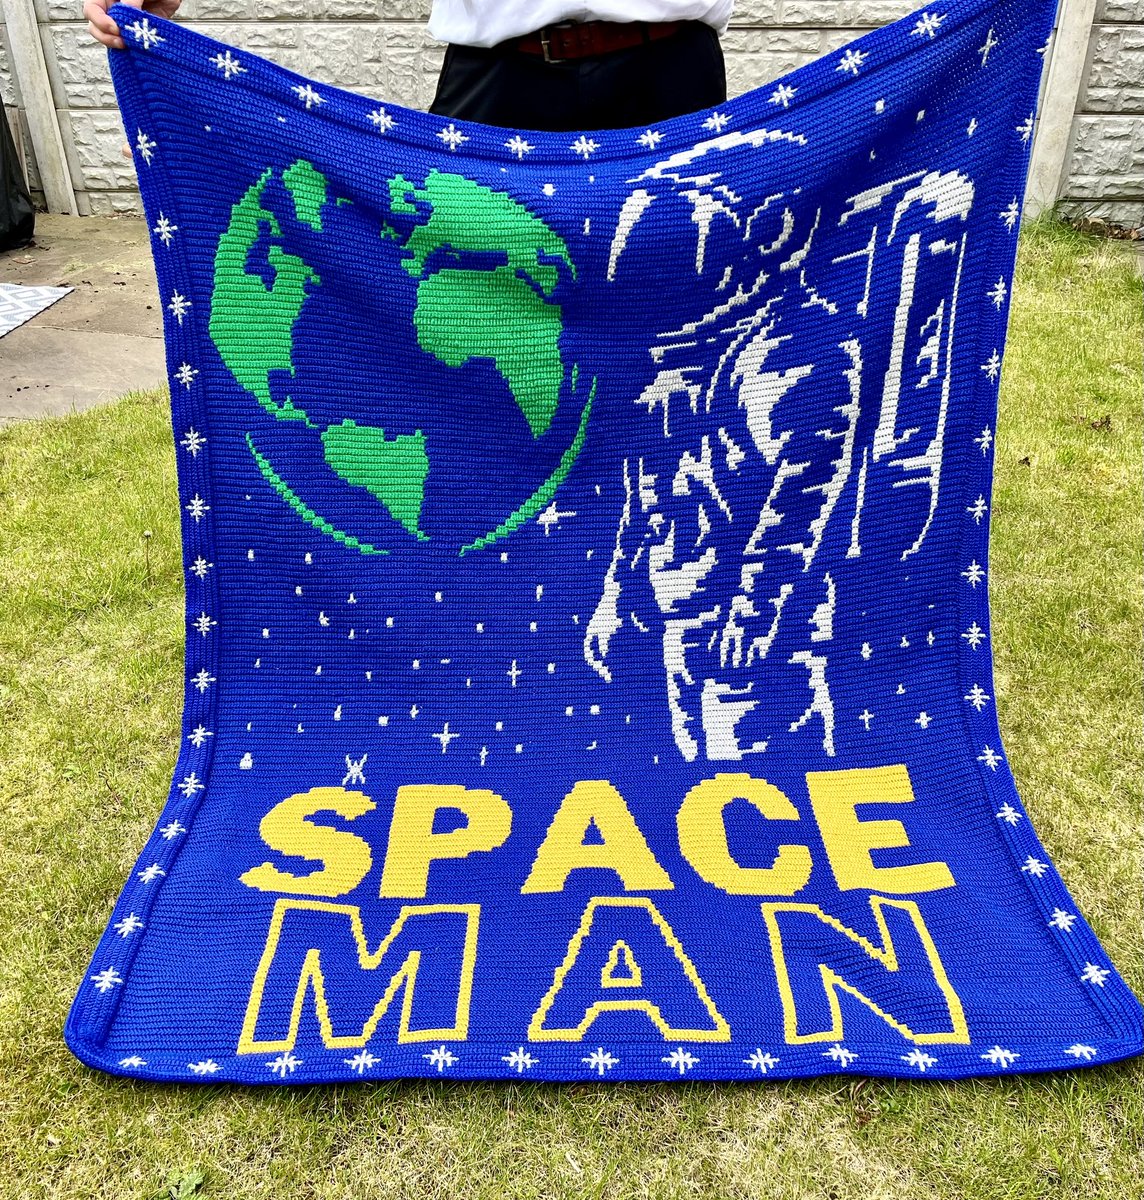 New Space Man Crochet Pattern!🚀 

Mosaic Overlay & tapestry technique. Perfect for intermediate crocheters & beyond, clear instructions, charts, and video tutorials to guide you every step of the way. 

payhip.com/b/J0Gyg 

 #CrochetPatterns  #SBS #MHHSBD #TheCraftersUK